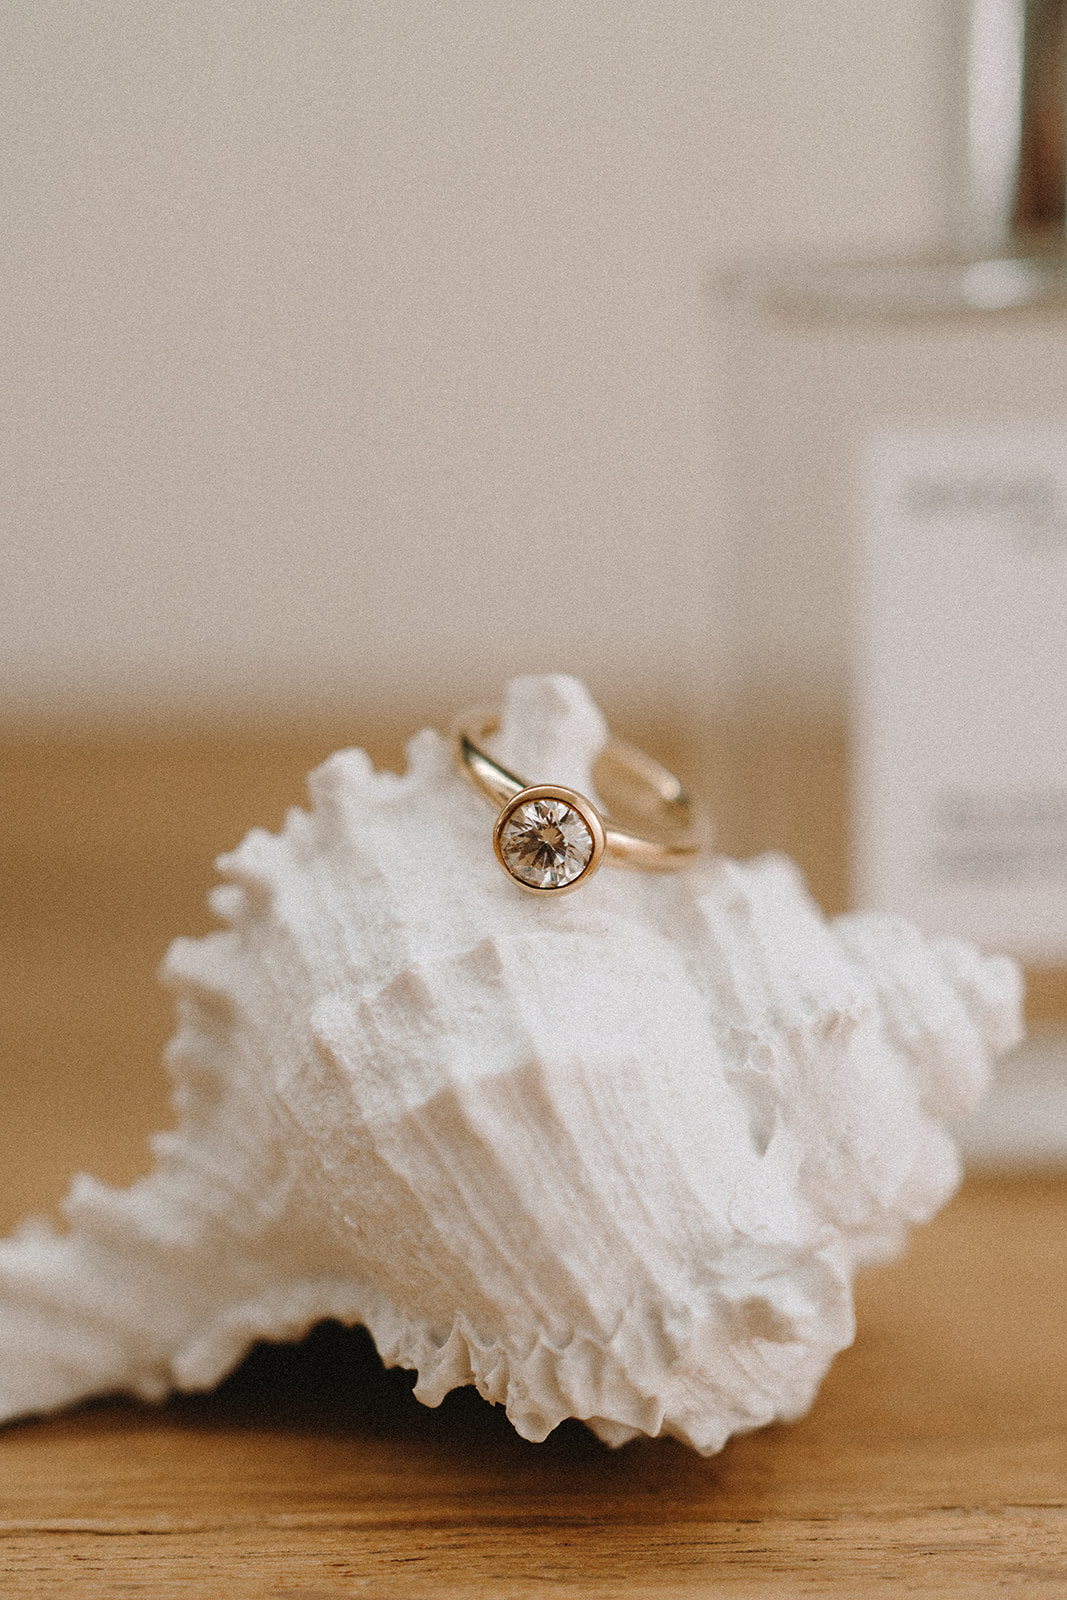 Ruusk Sydney modern heirloom wedding ring photographed by Claire Coulthard Photography UK